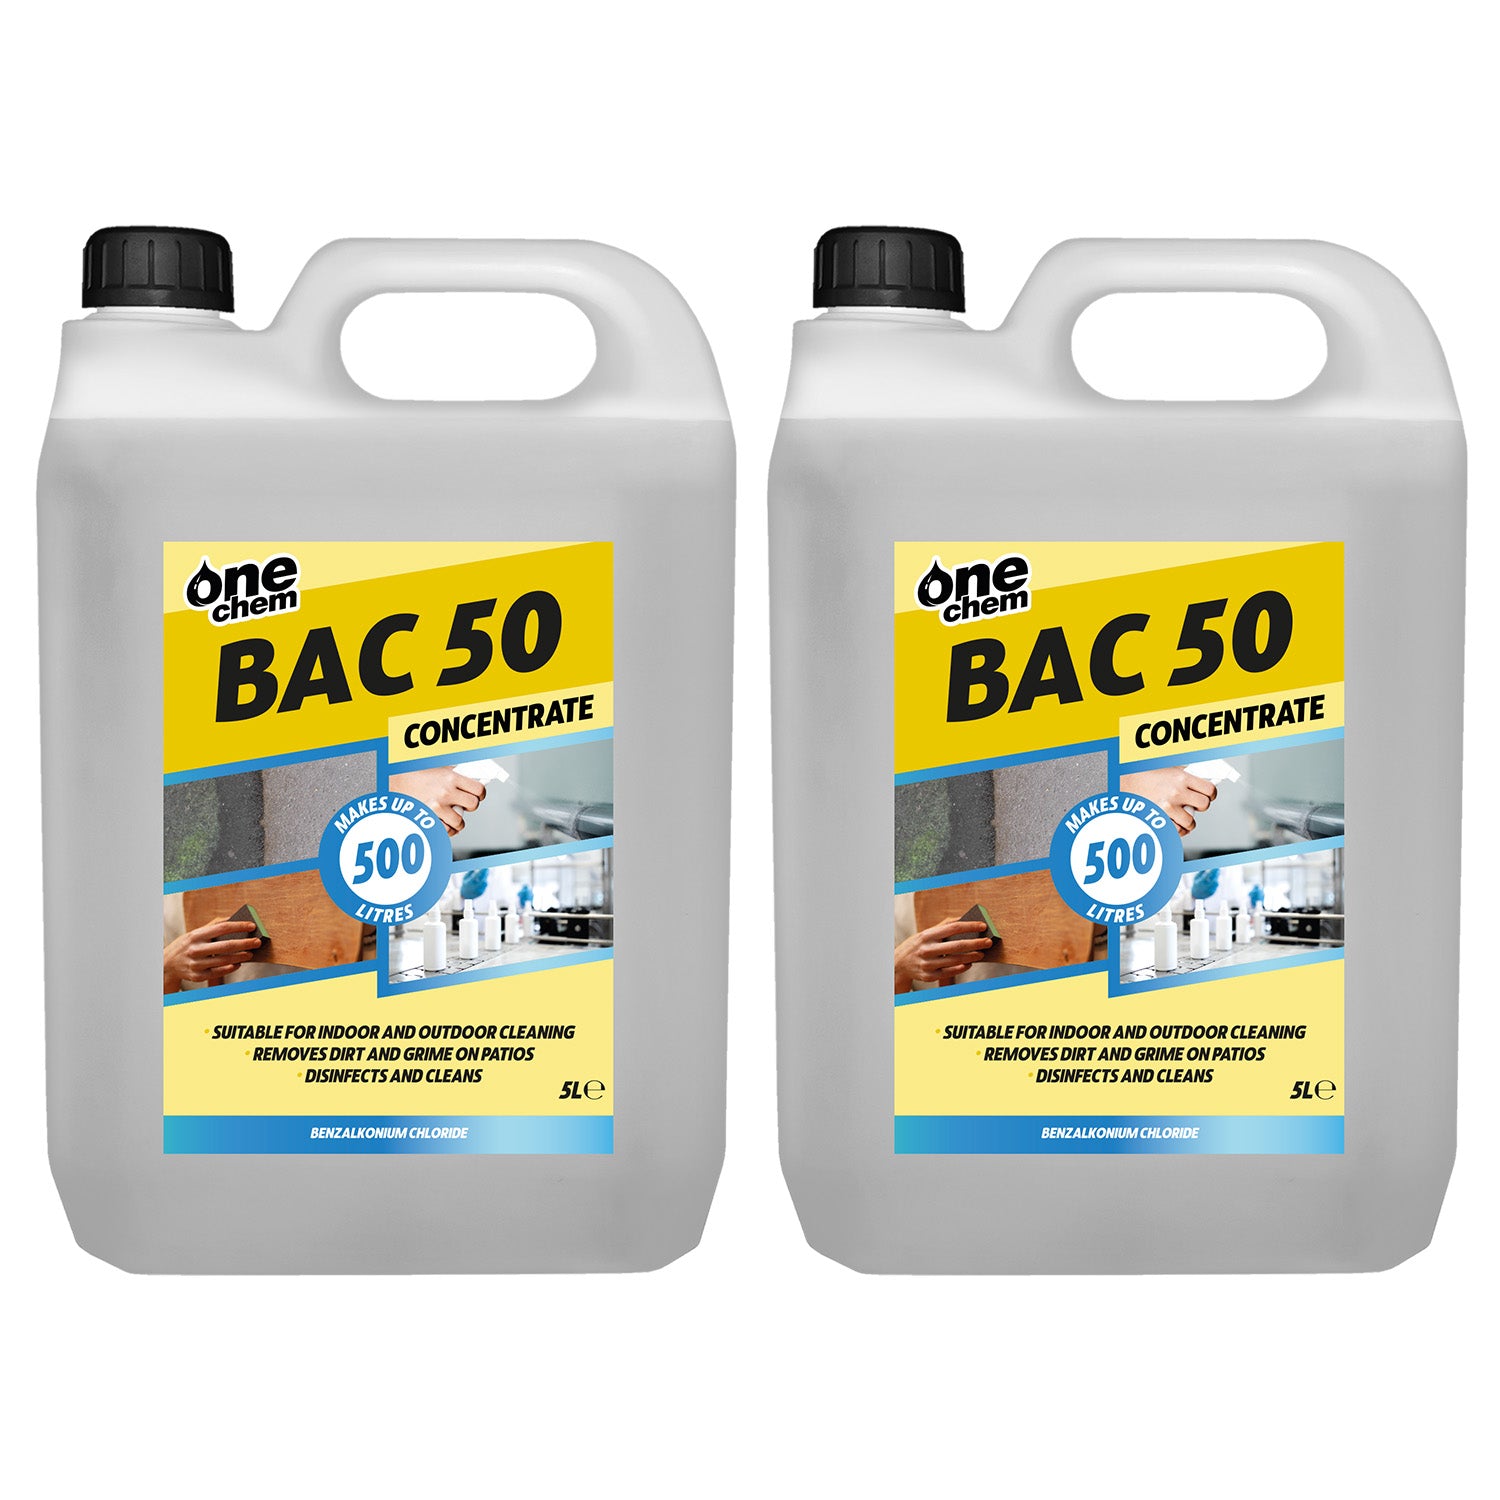 One Chem - BAC 50 Benzalkonium Chloride Concentrated 2 x 5L